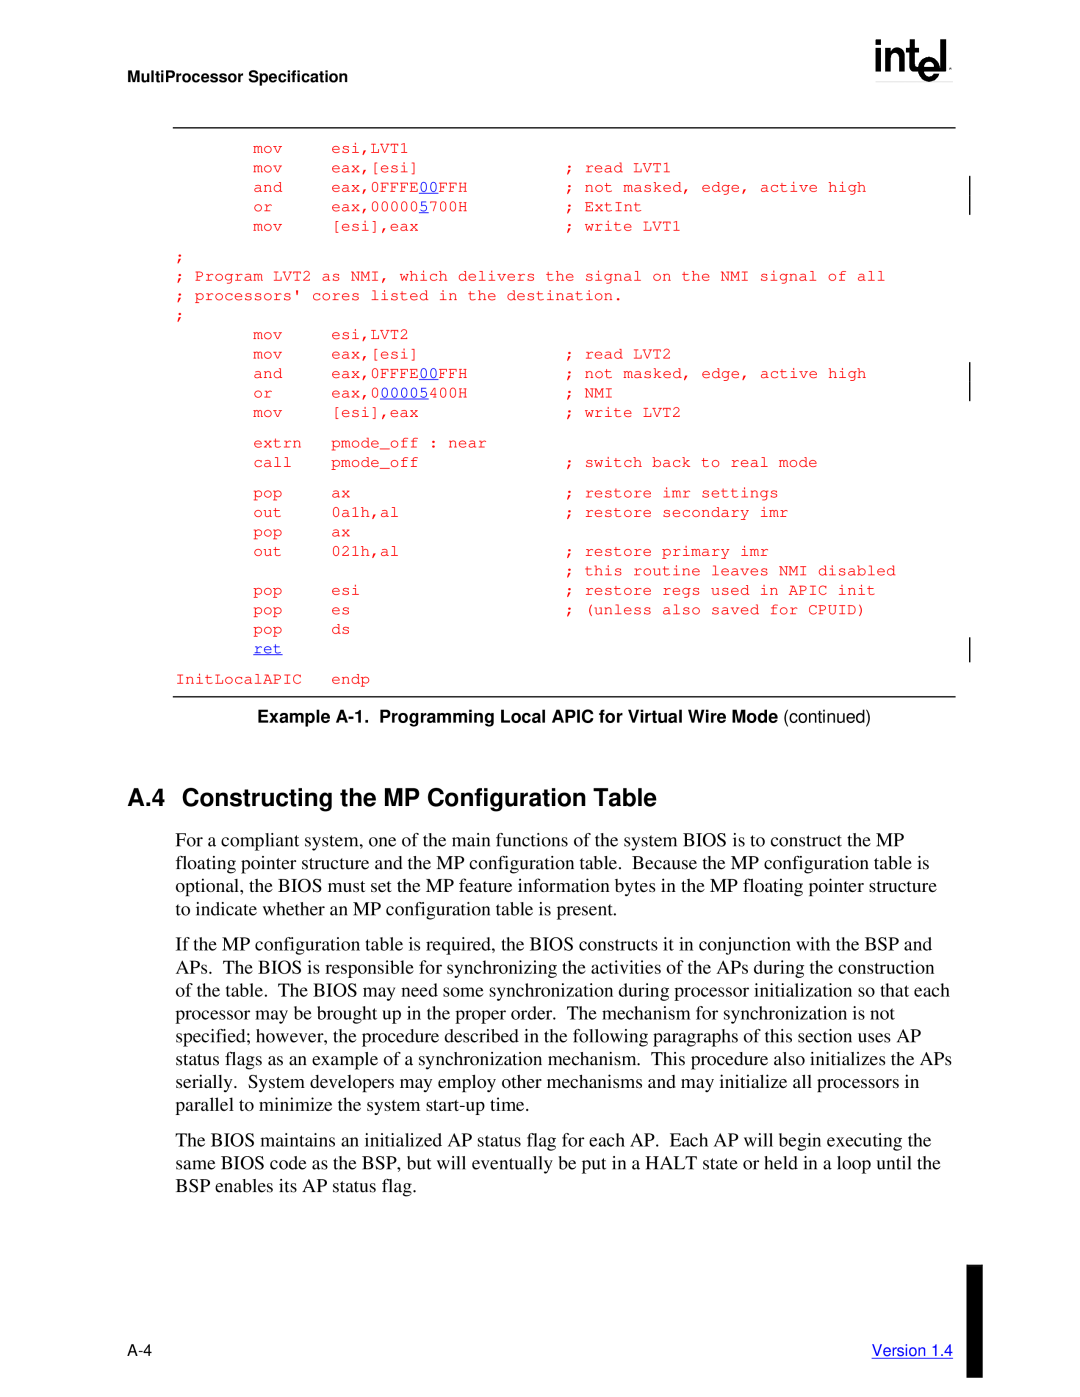 Intel MultiProcessor manual A.4 Constructing the MP Configuration Table 